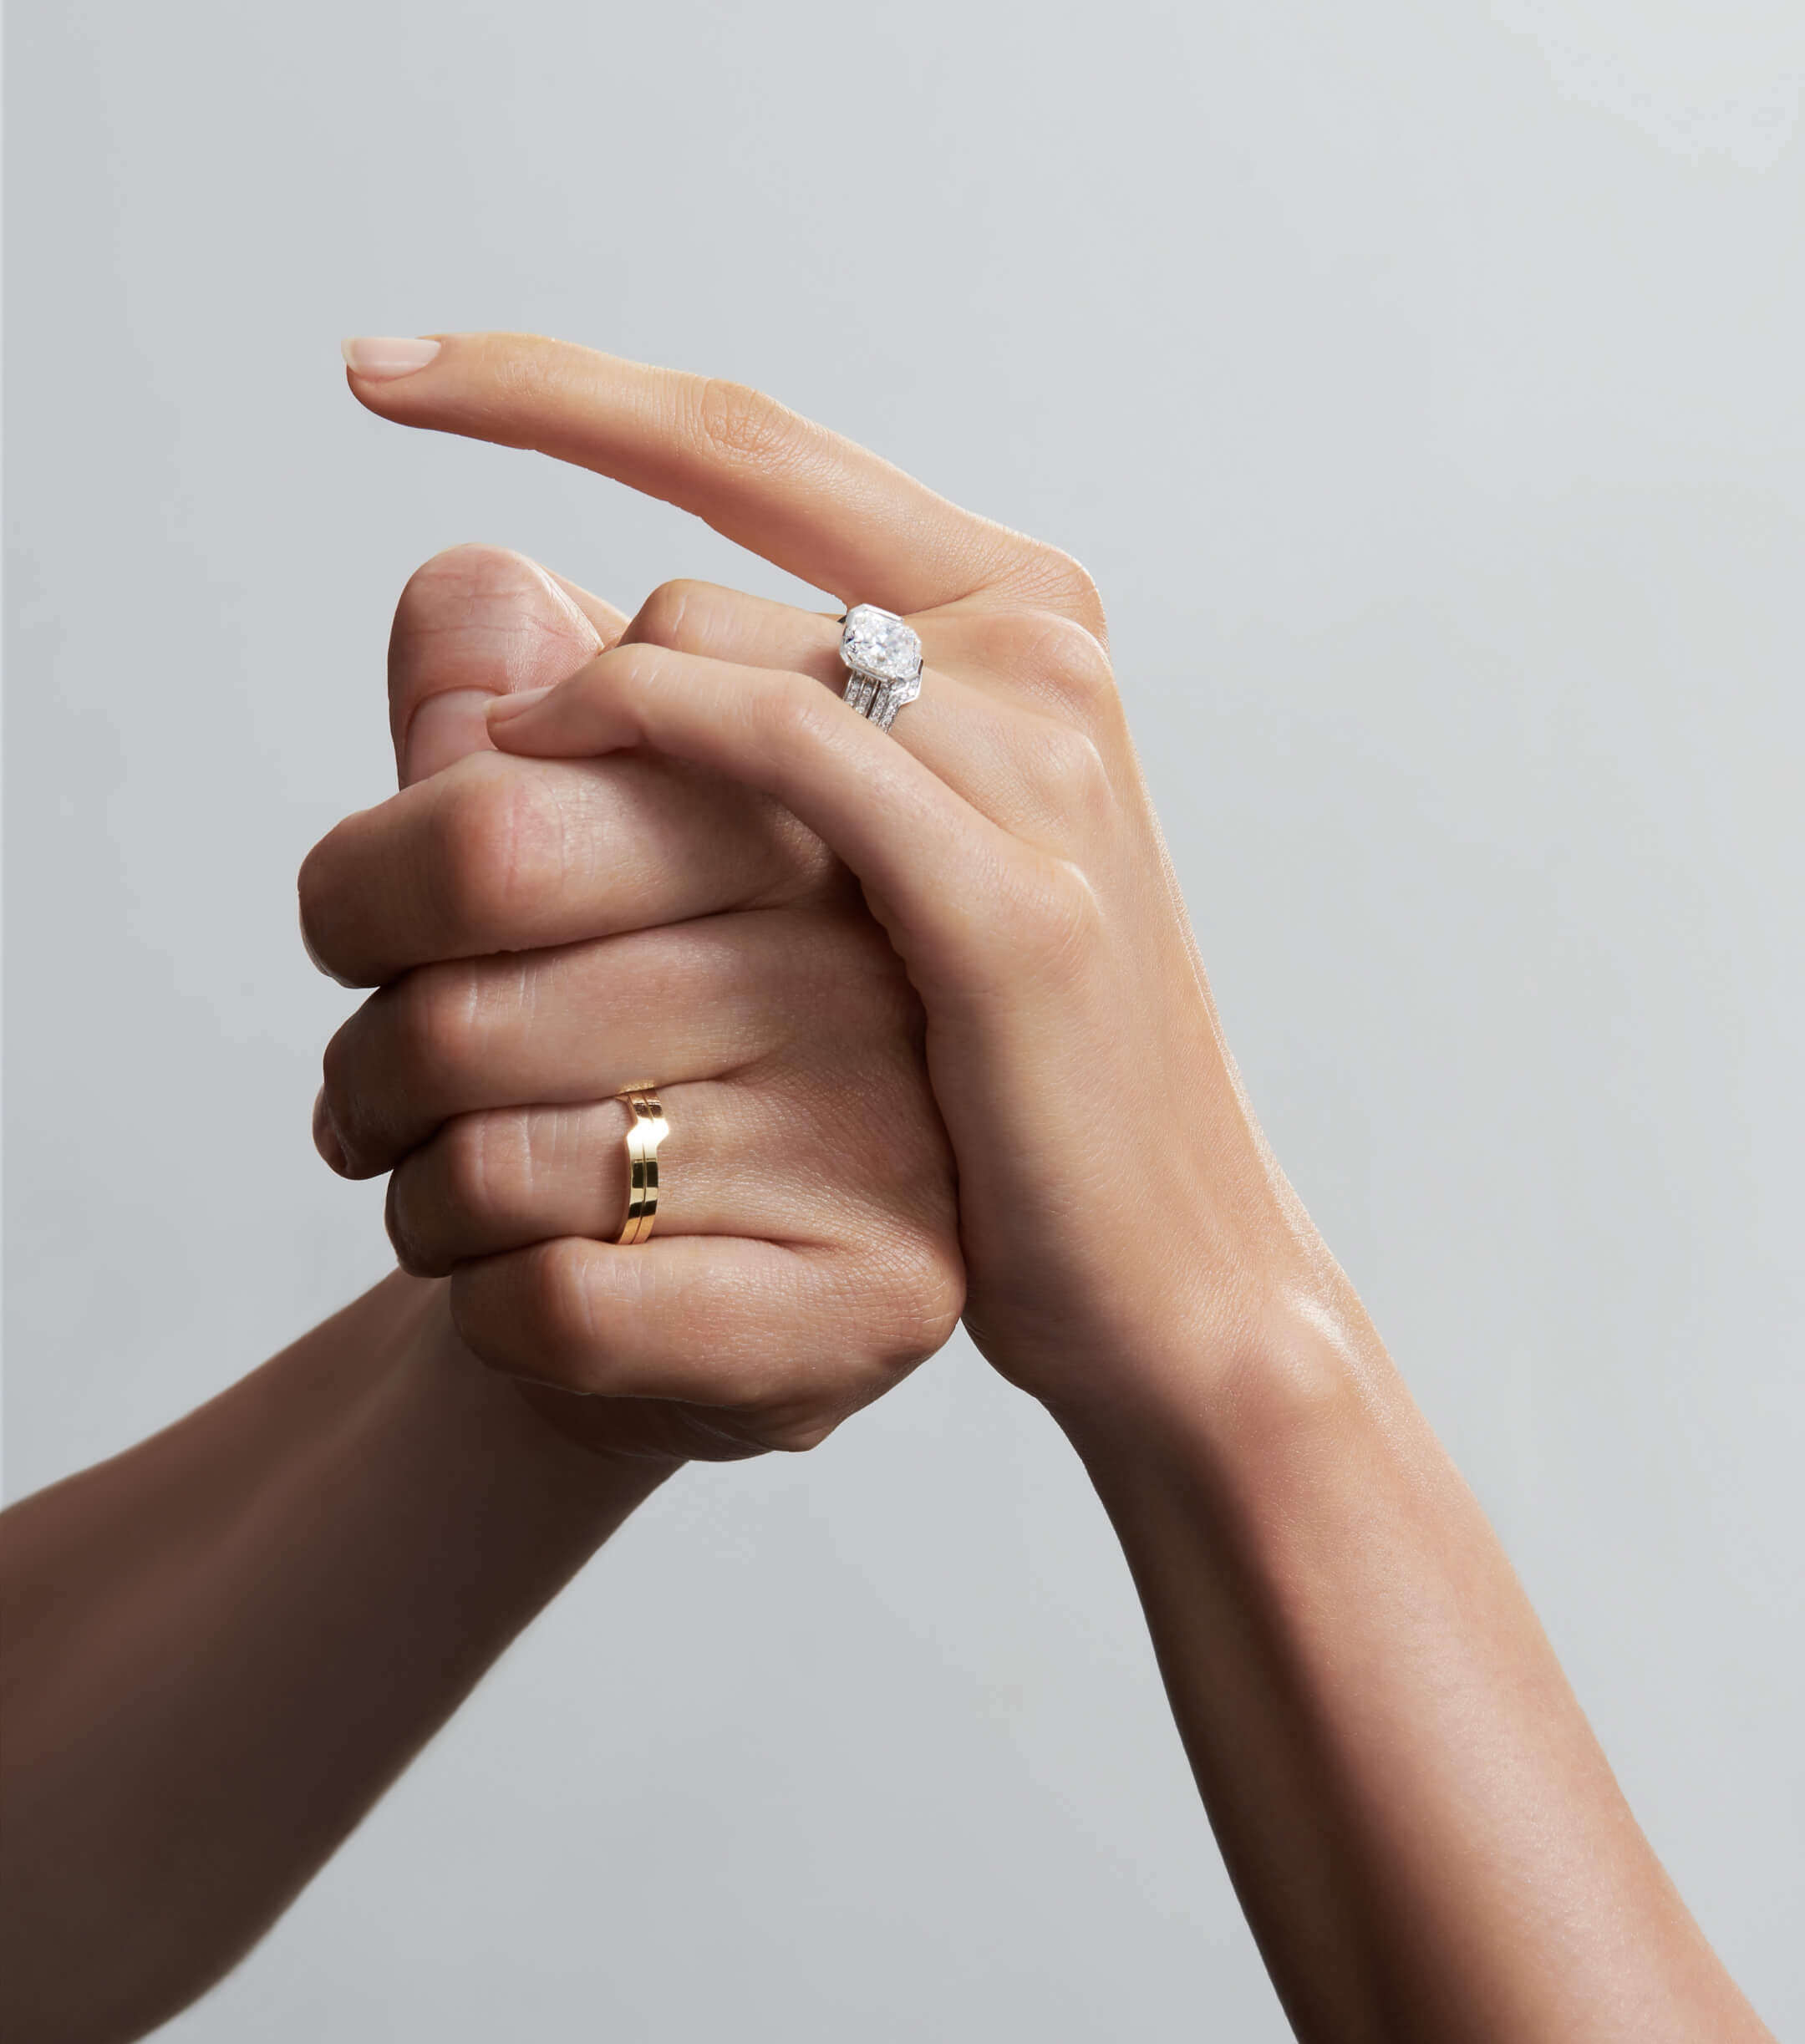 Unsaid's lab-grown diamond rings for you and me.